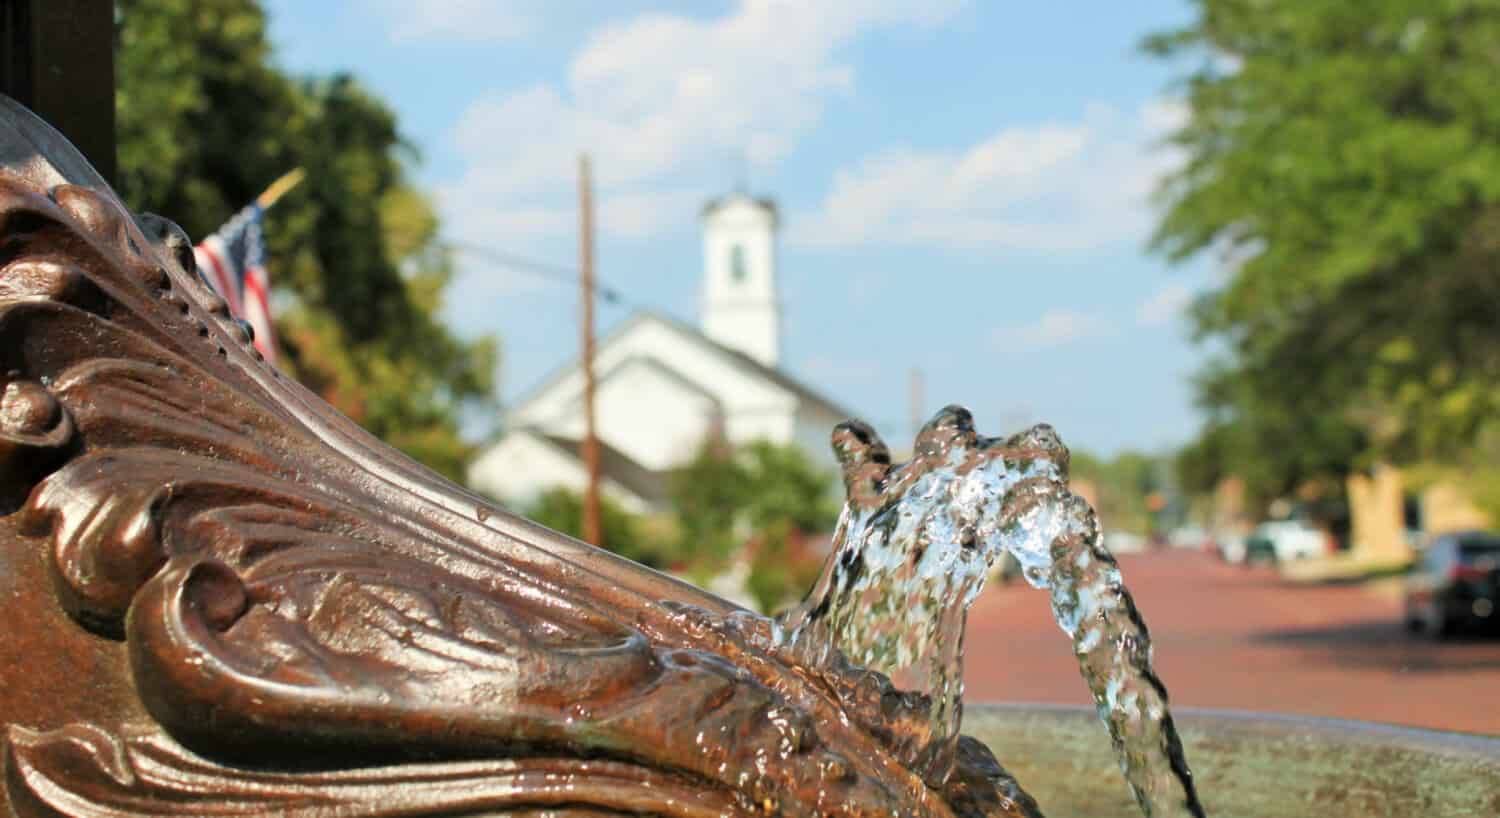 Close up view of a bronze water fountain